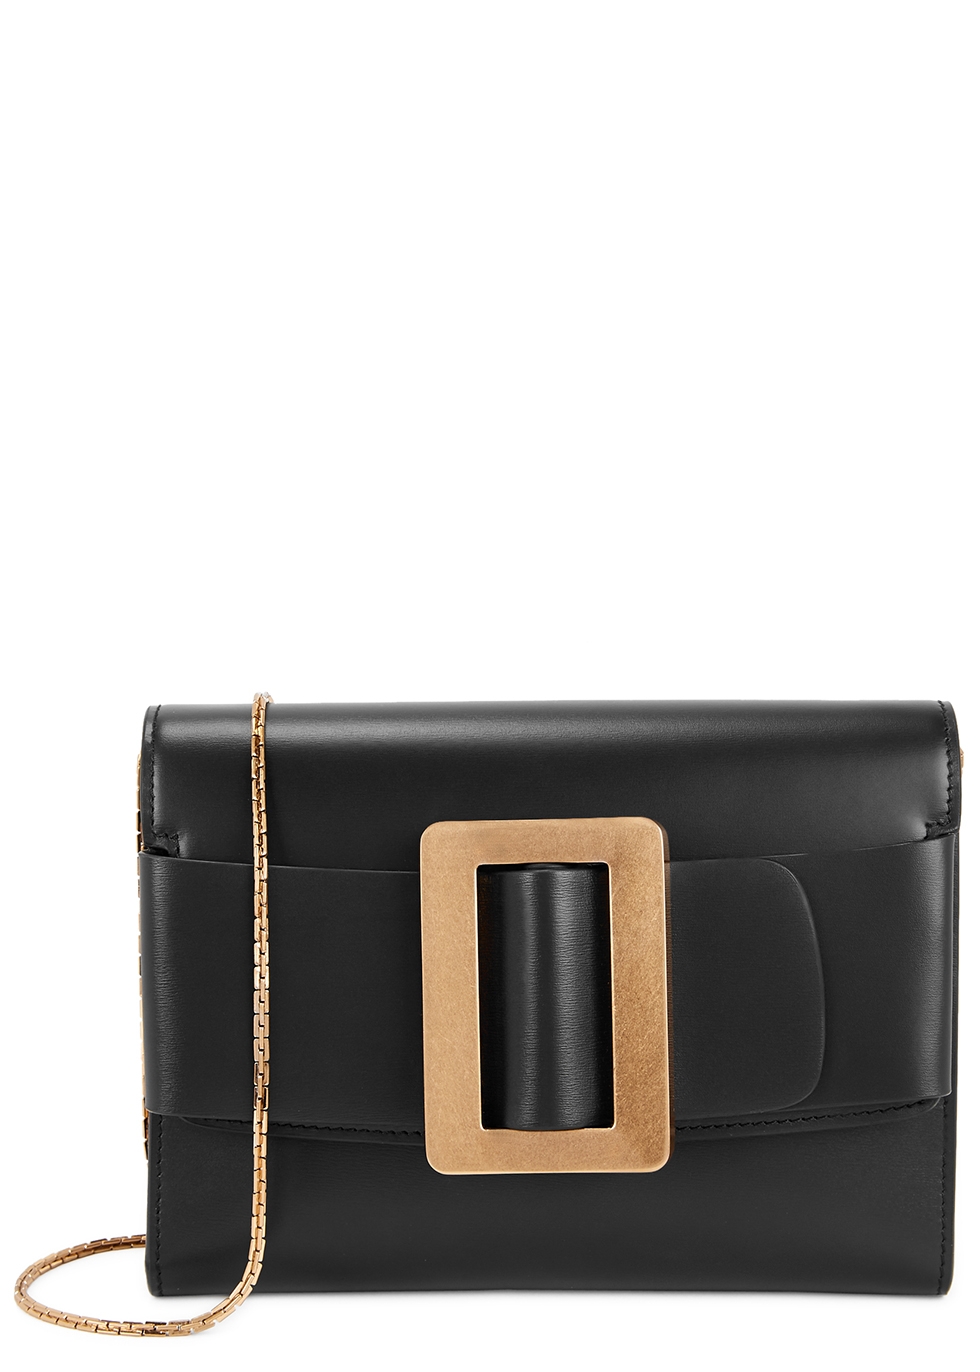 Buckle leather clutch